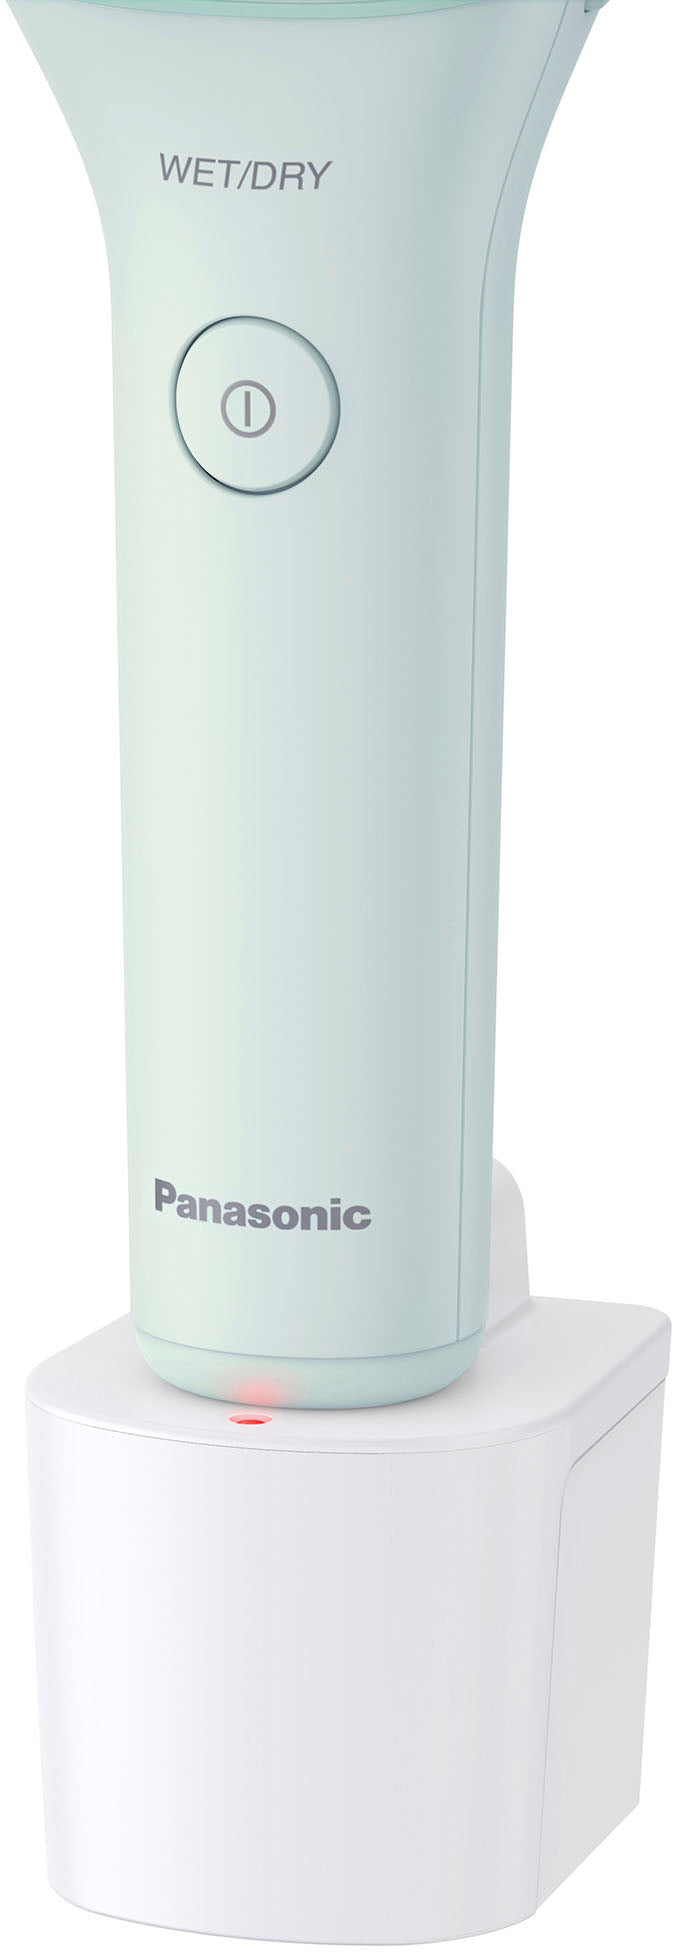 Panasonic - CloseCurves ES-WL60-G Rechargeable Wet/Dry Electric Shaver and Trimmer for Women - Mint_5